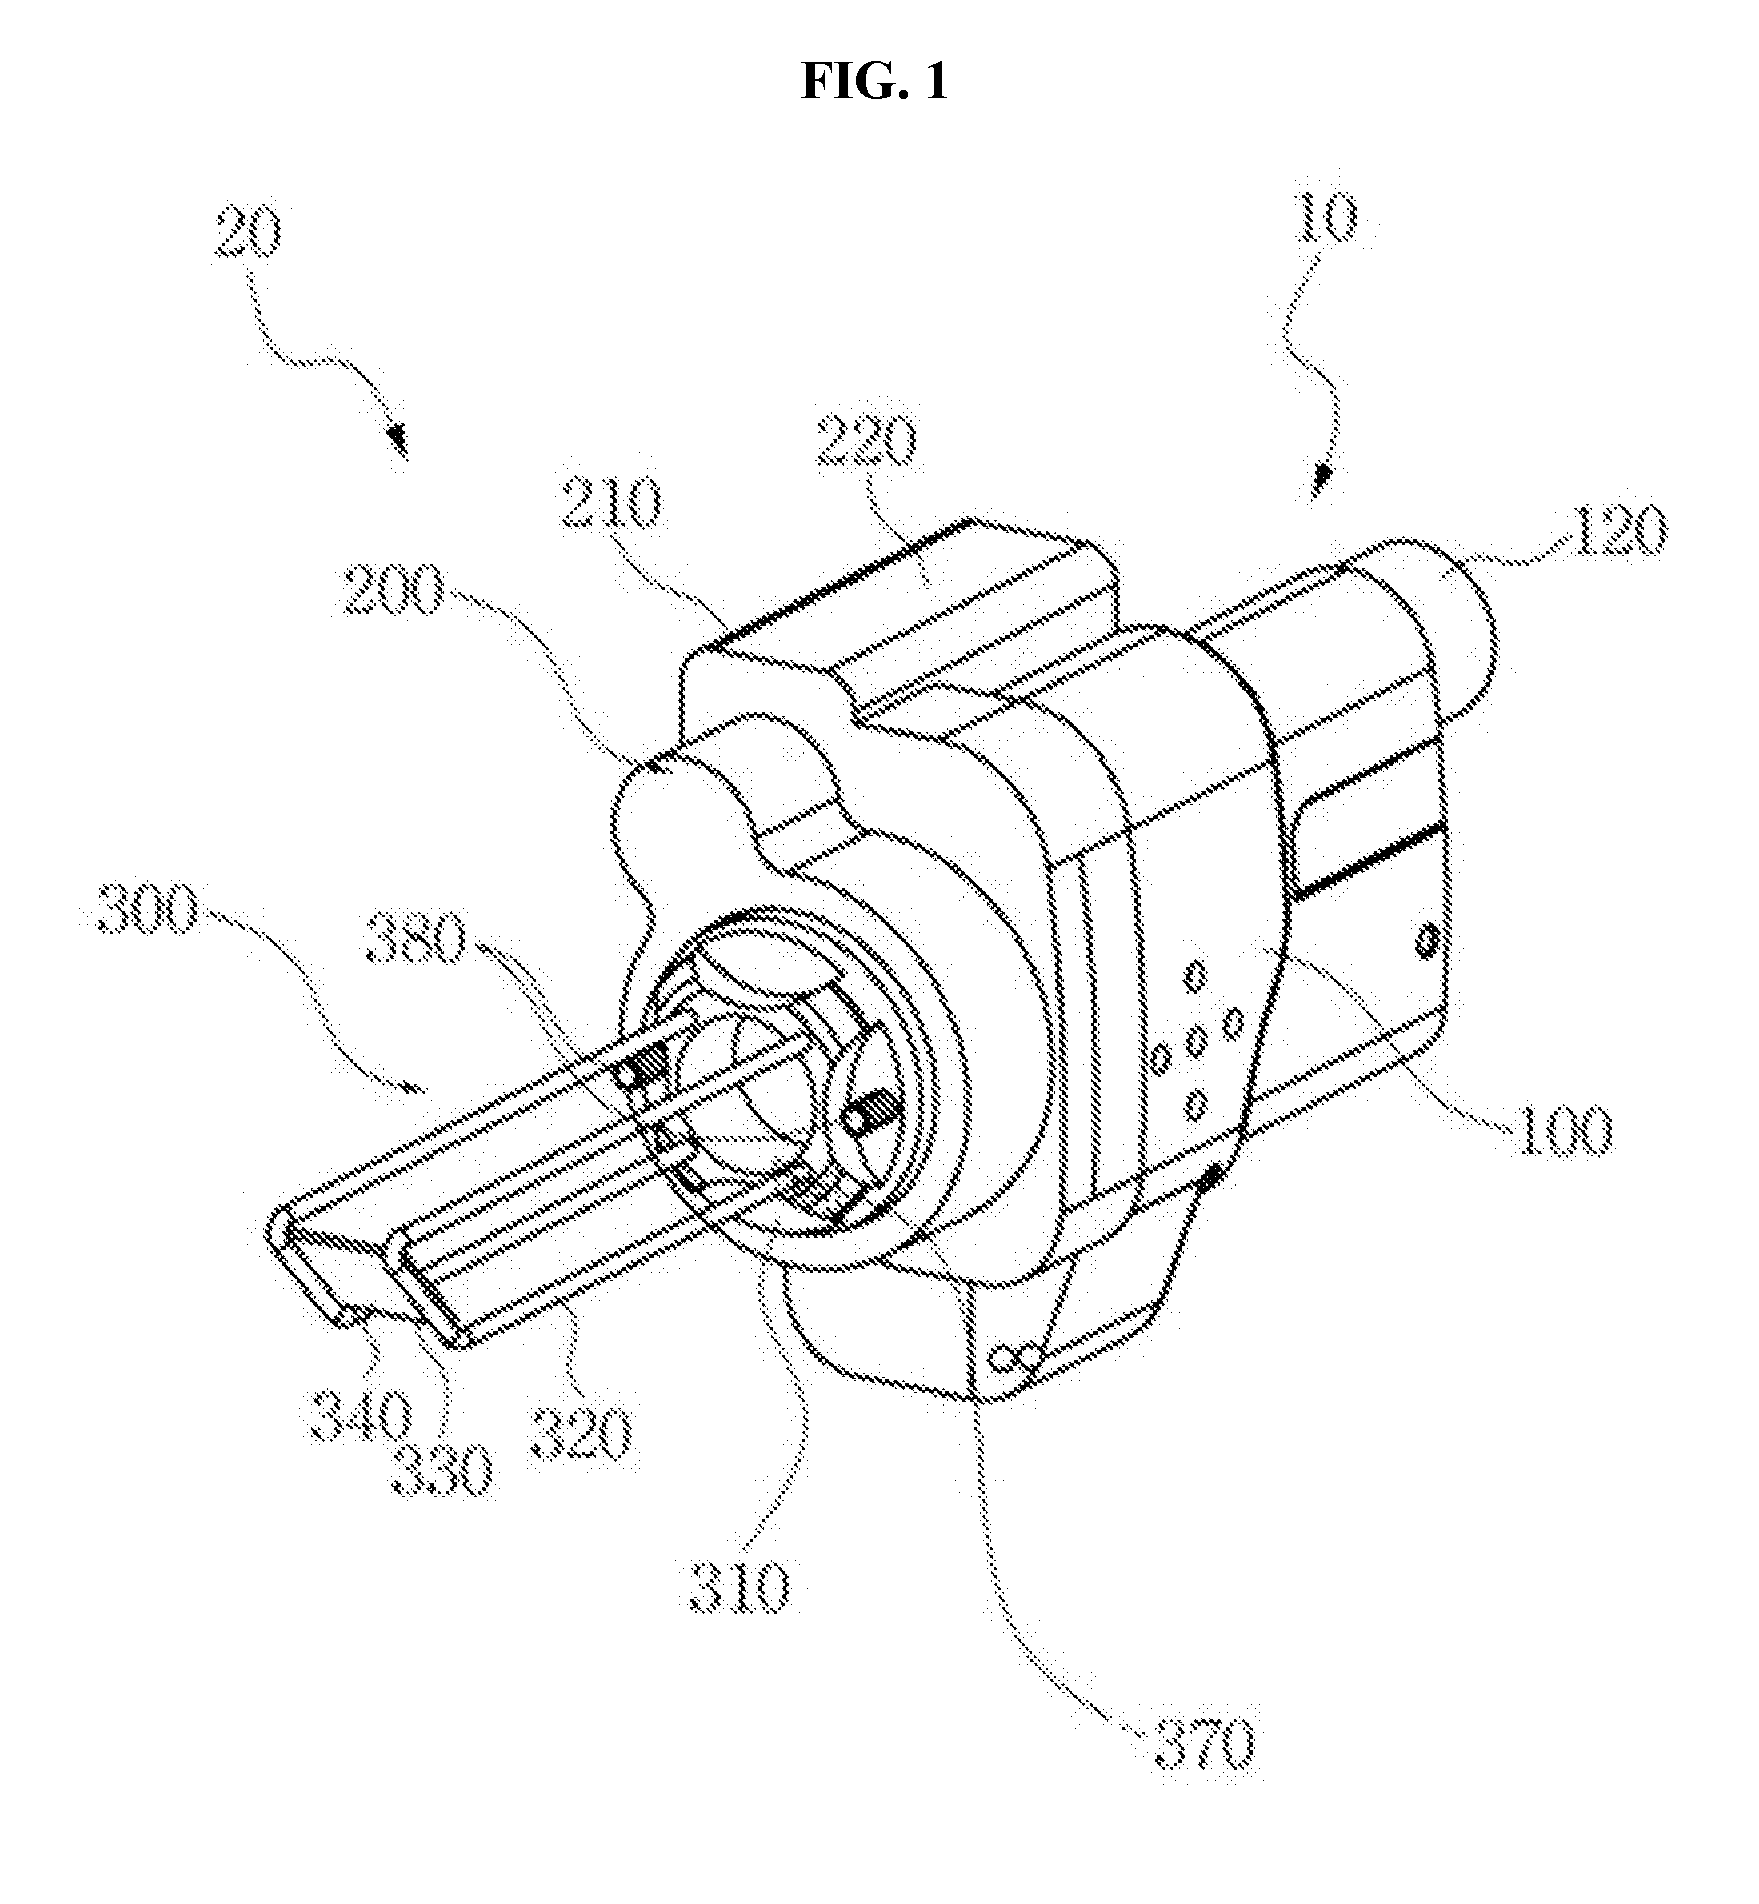 Fractional laser surgical equipment having multiple purposes including treatment of vagina